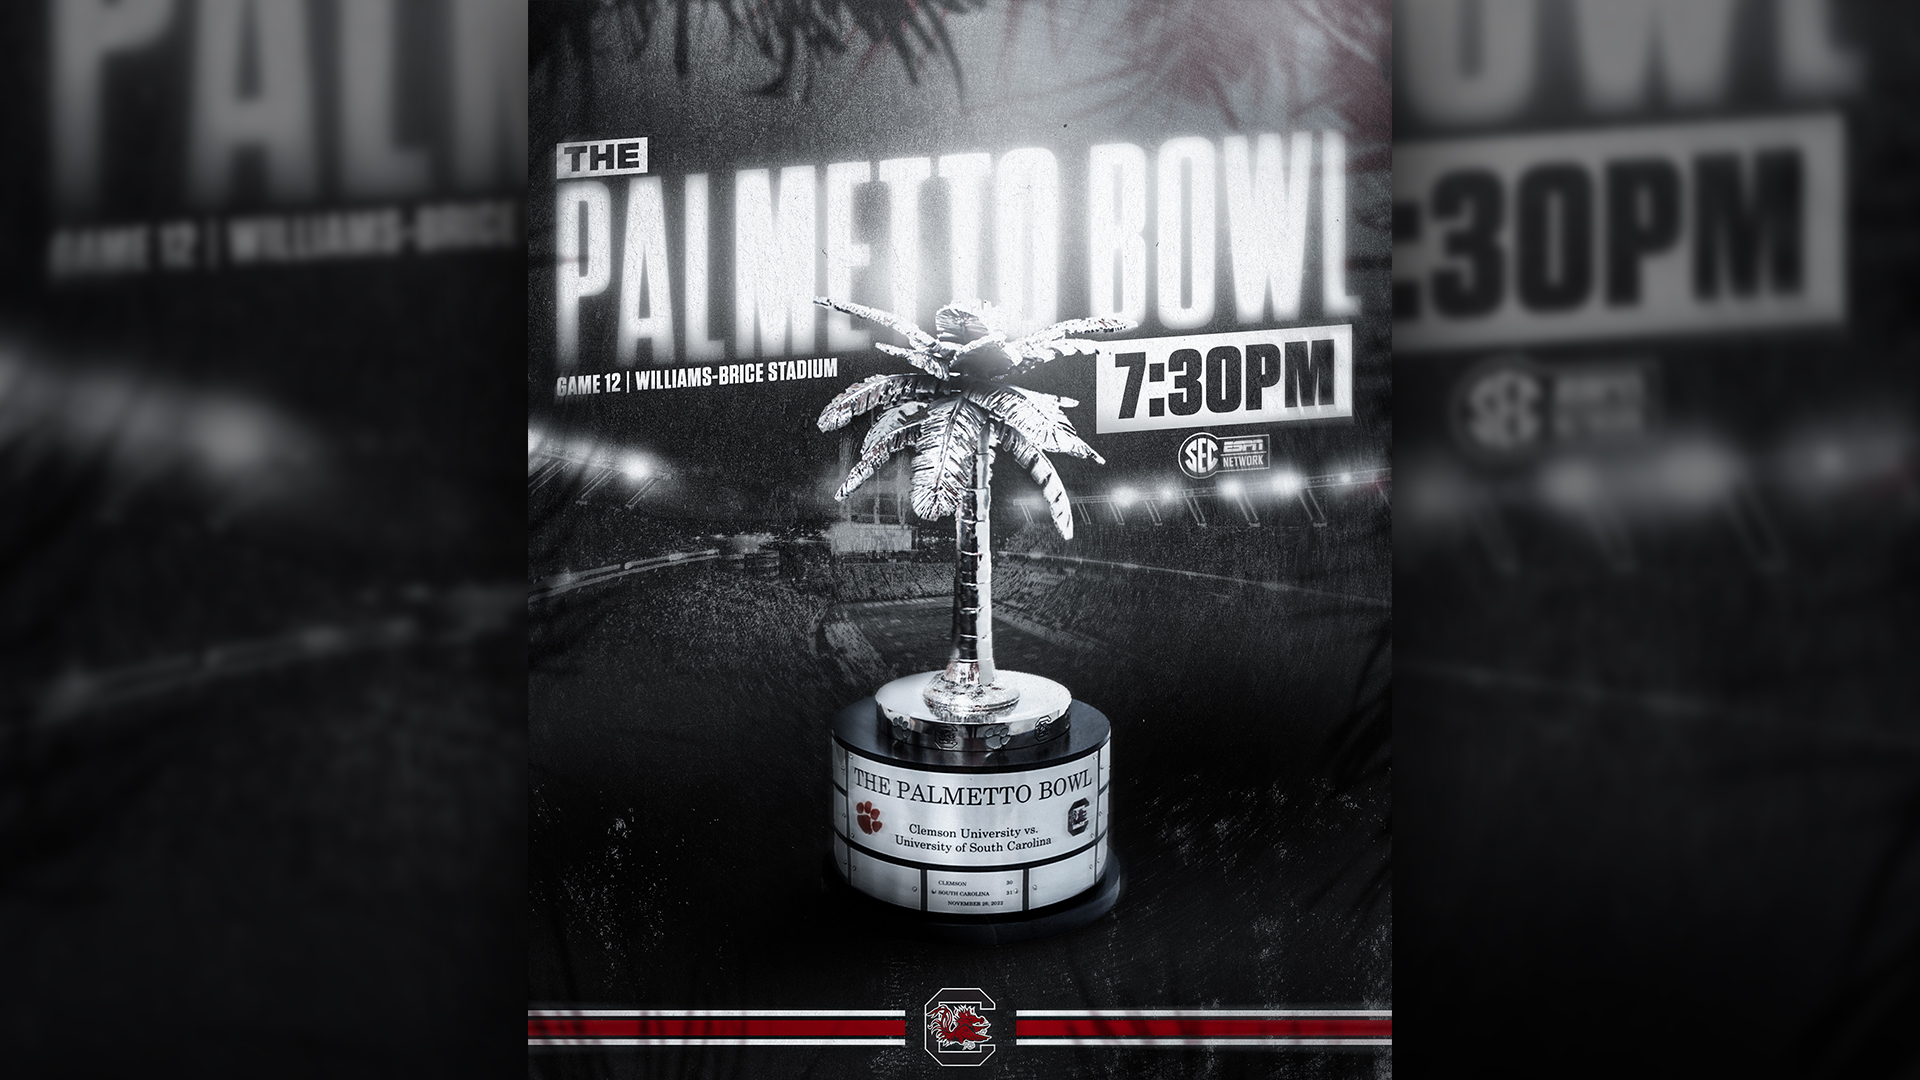 Palmetto Bowl Will Be Played Under the Lights on Saturday, Nov. 25